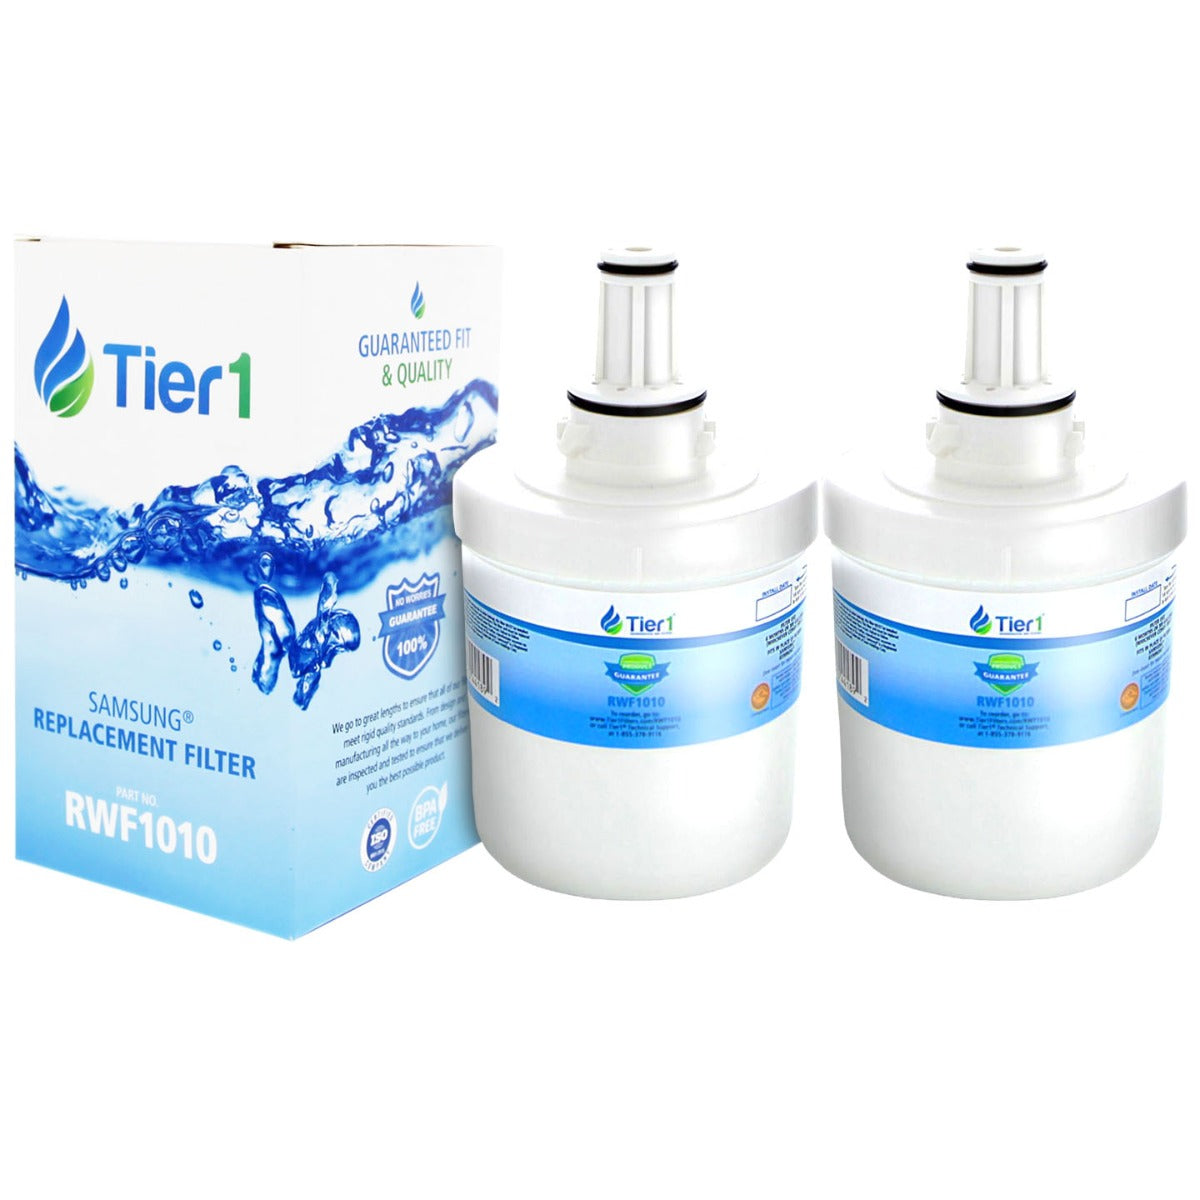 Tier1 Samsung DA29-00003G Refrigerator Water Filter Replacement Comparable